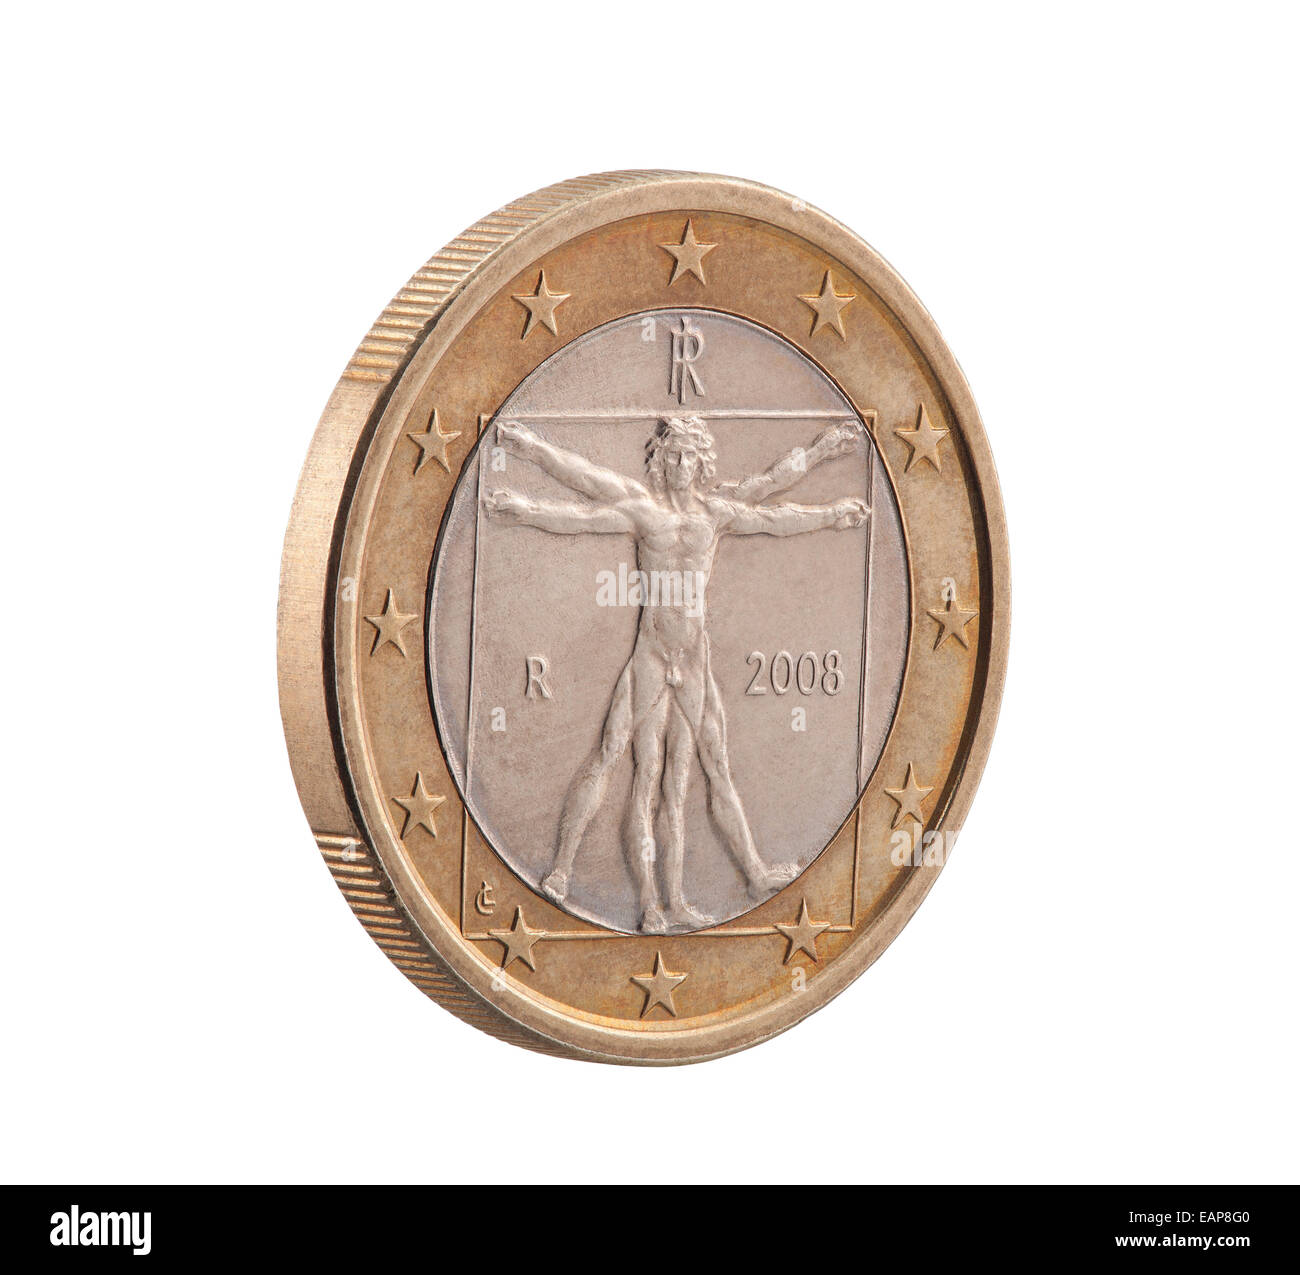 Italian One Euro with Vitruvian Man. Clipping path included. Stock Photo